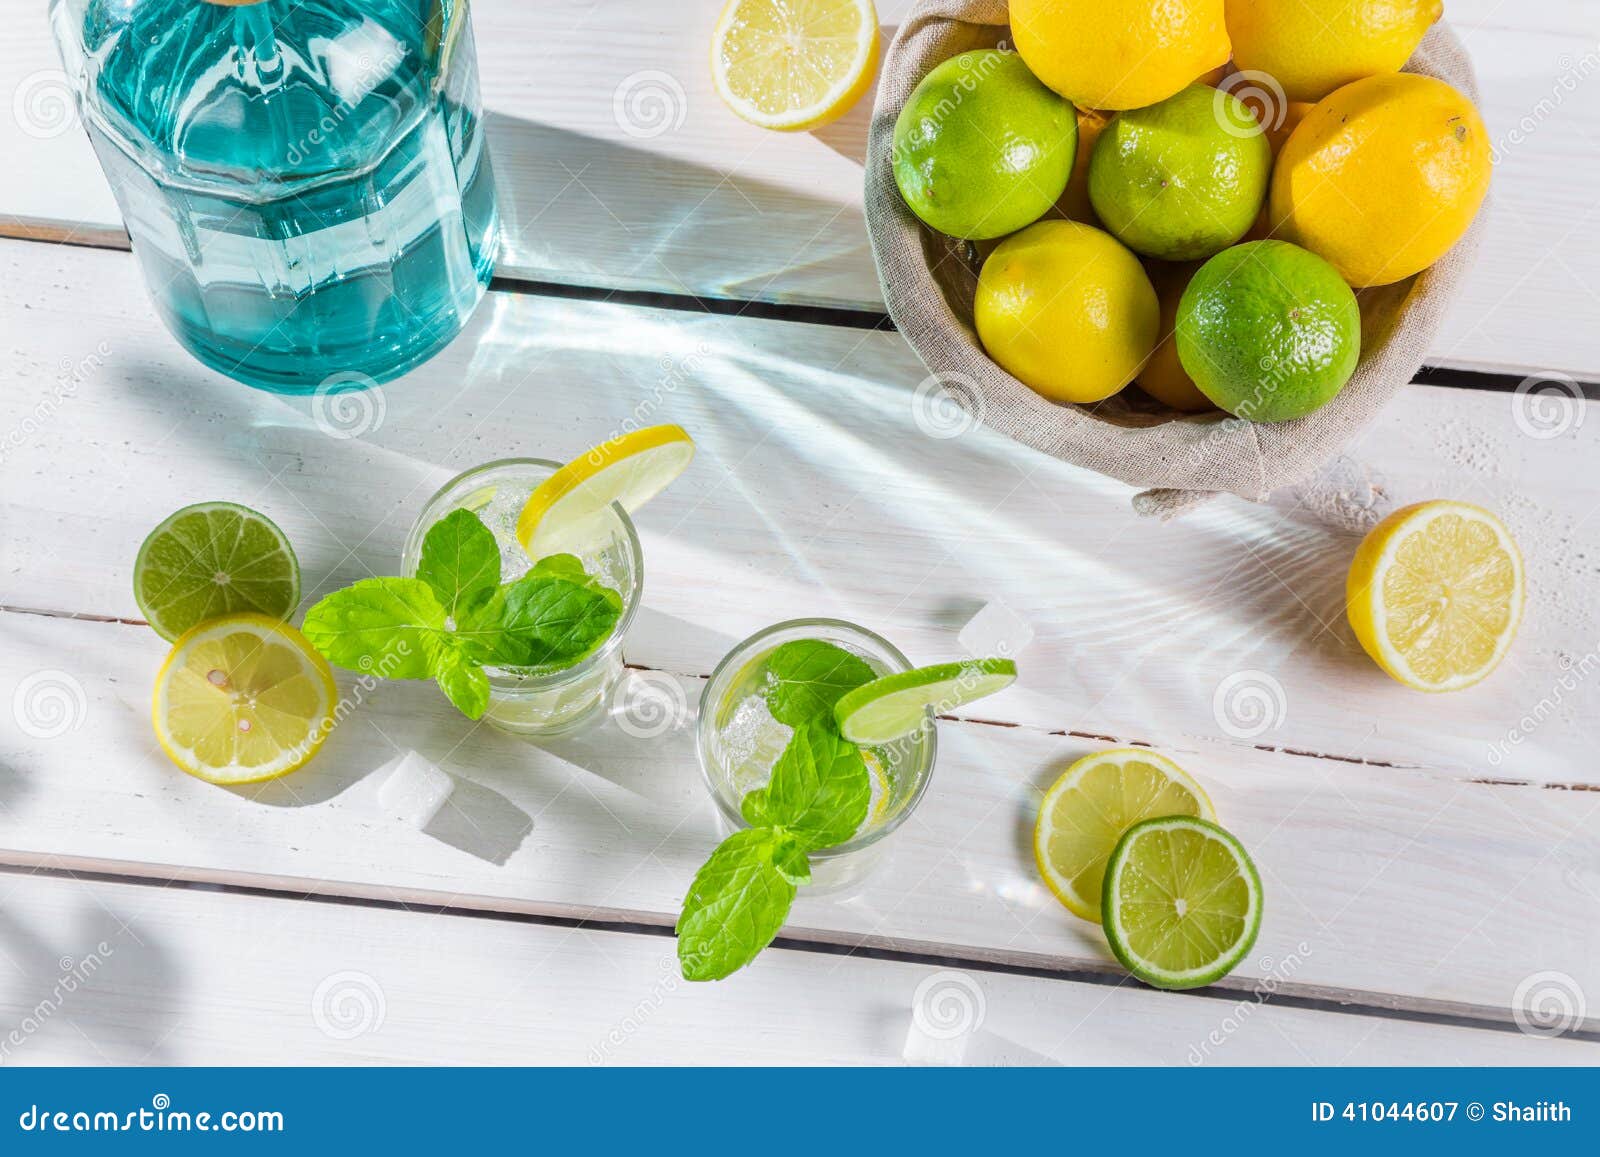 Cold Lemonade with Mint Leaf in Sunny Garden Stock Image - Image of ...